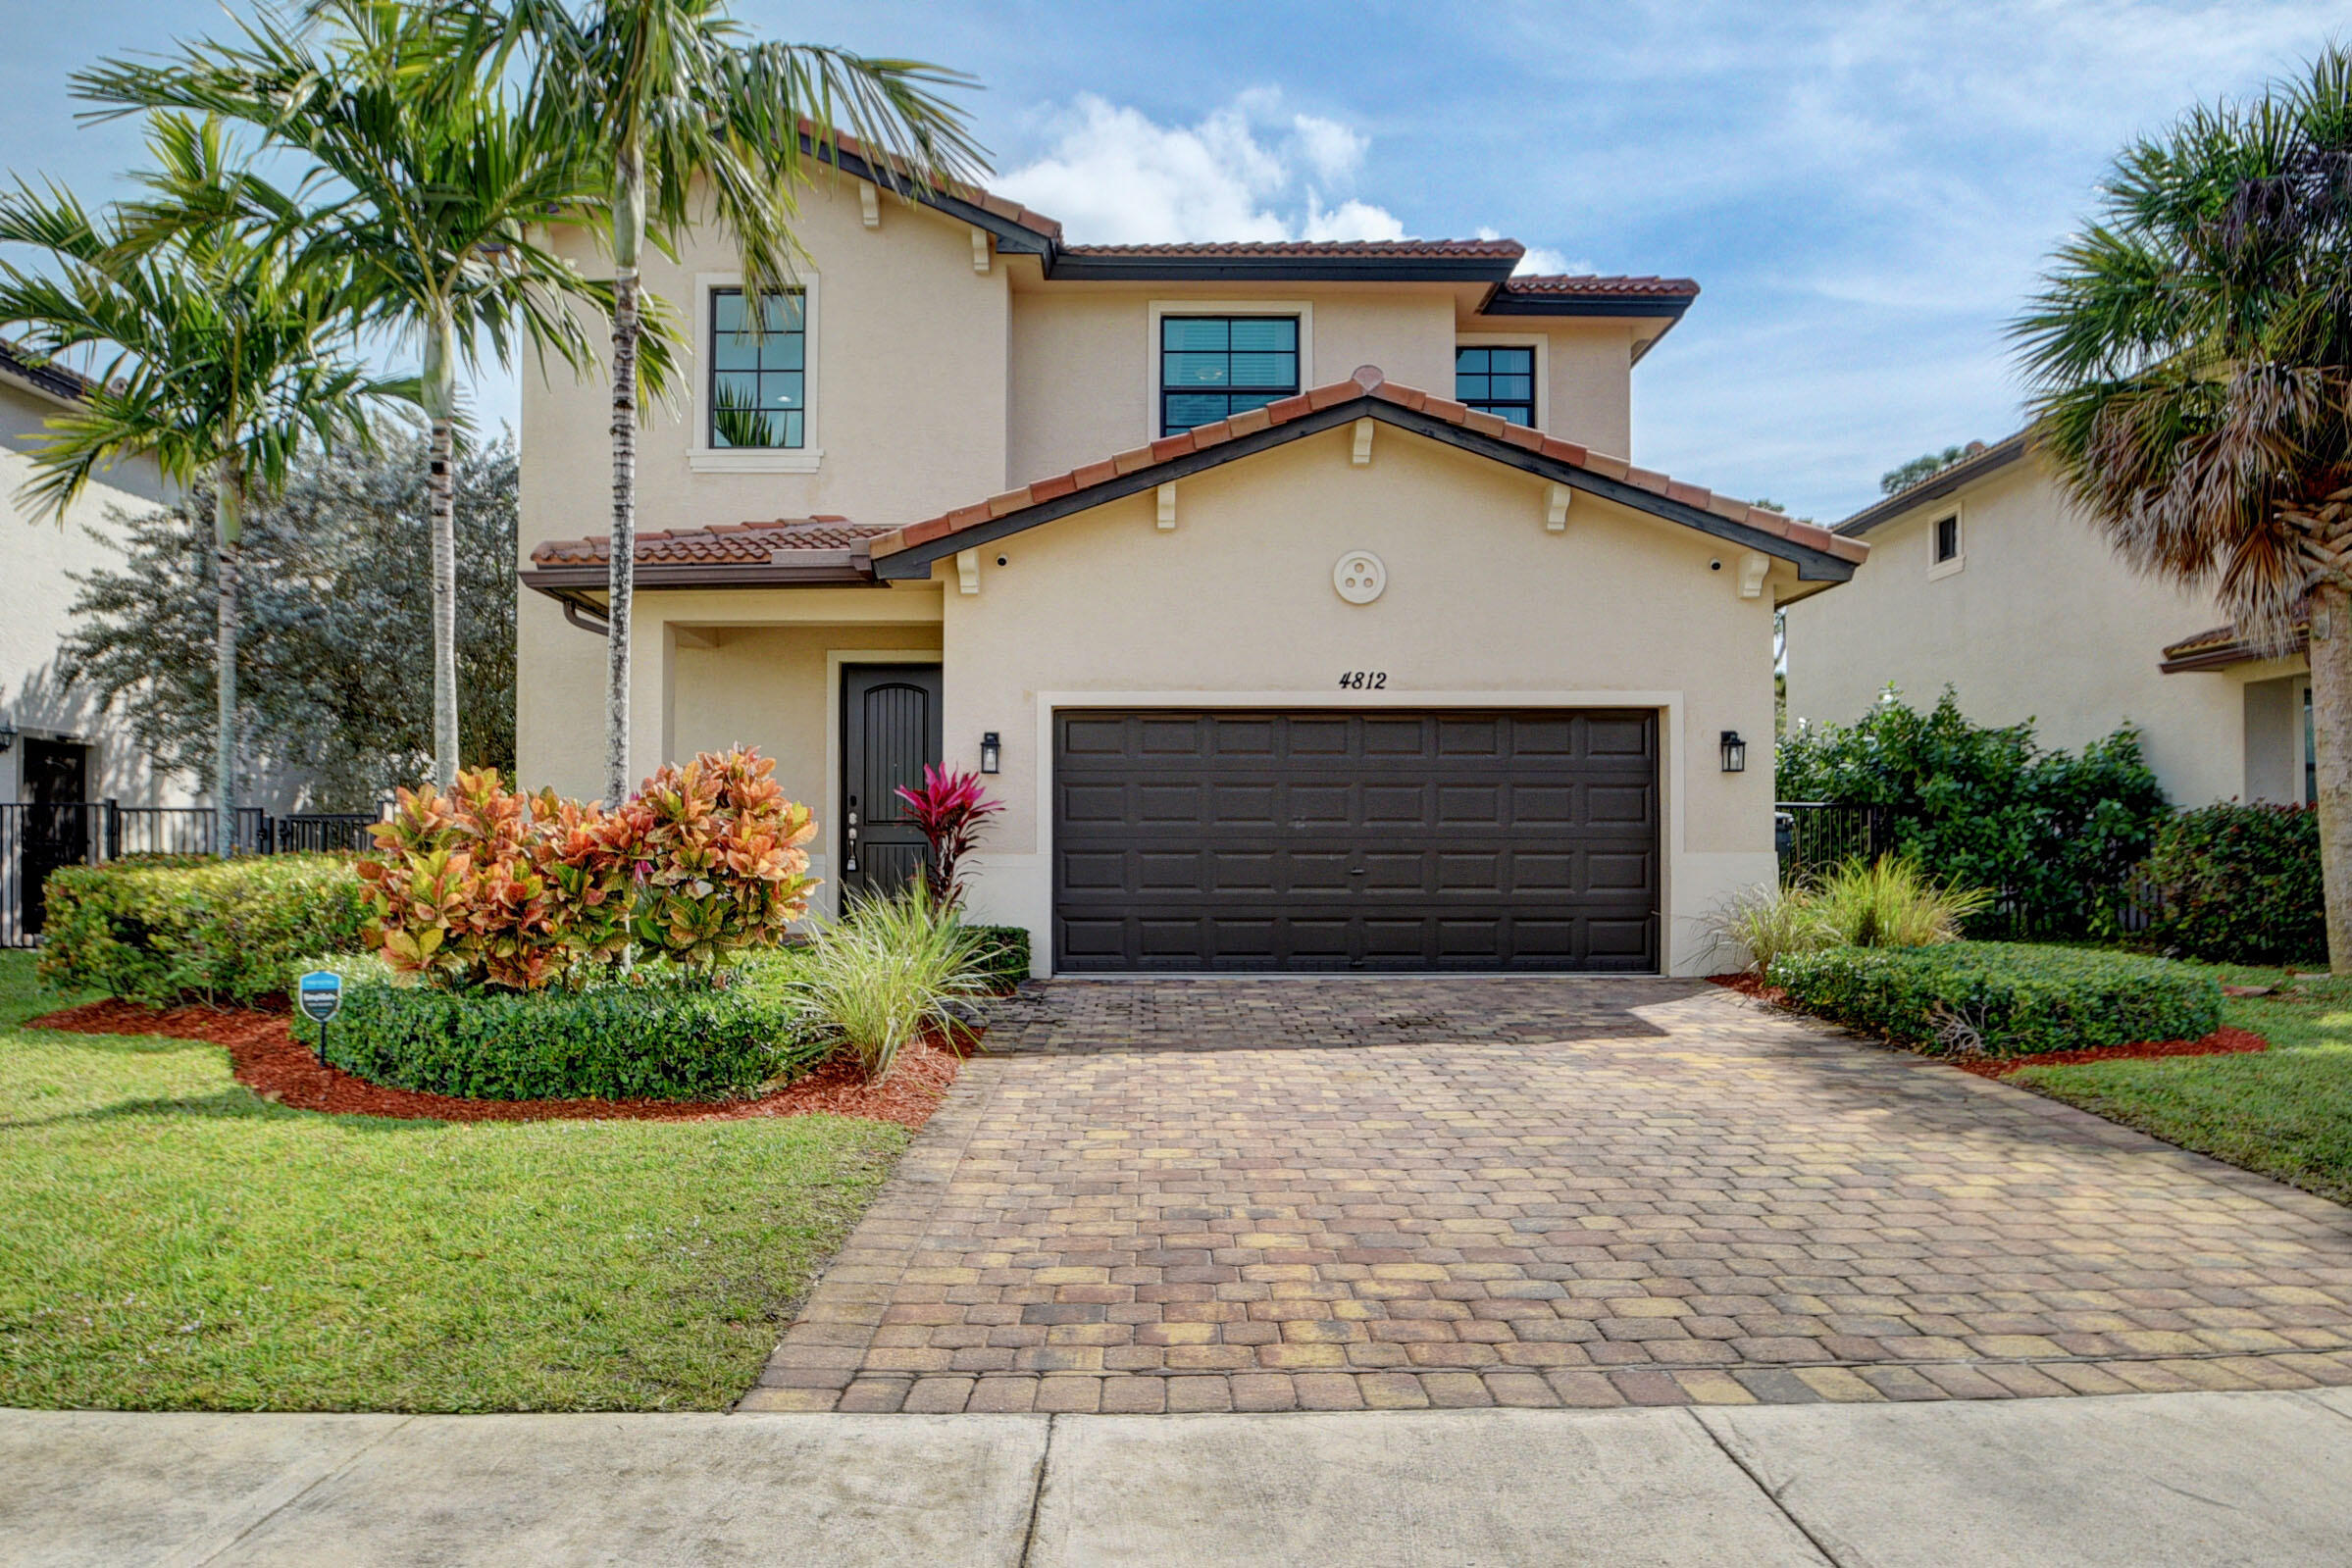 Property for Sale at 4812 Conifer Court, Greenacres, Palm Beach County, Florida - Bedrooms: 5 
Bathrooms: 3.5  - $650,000